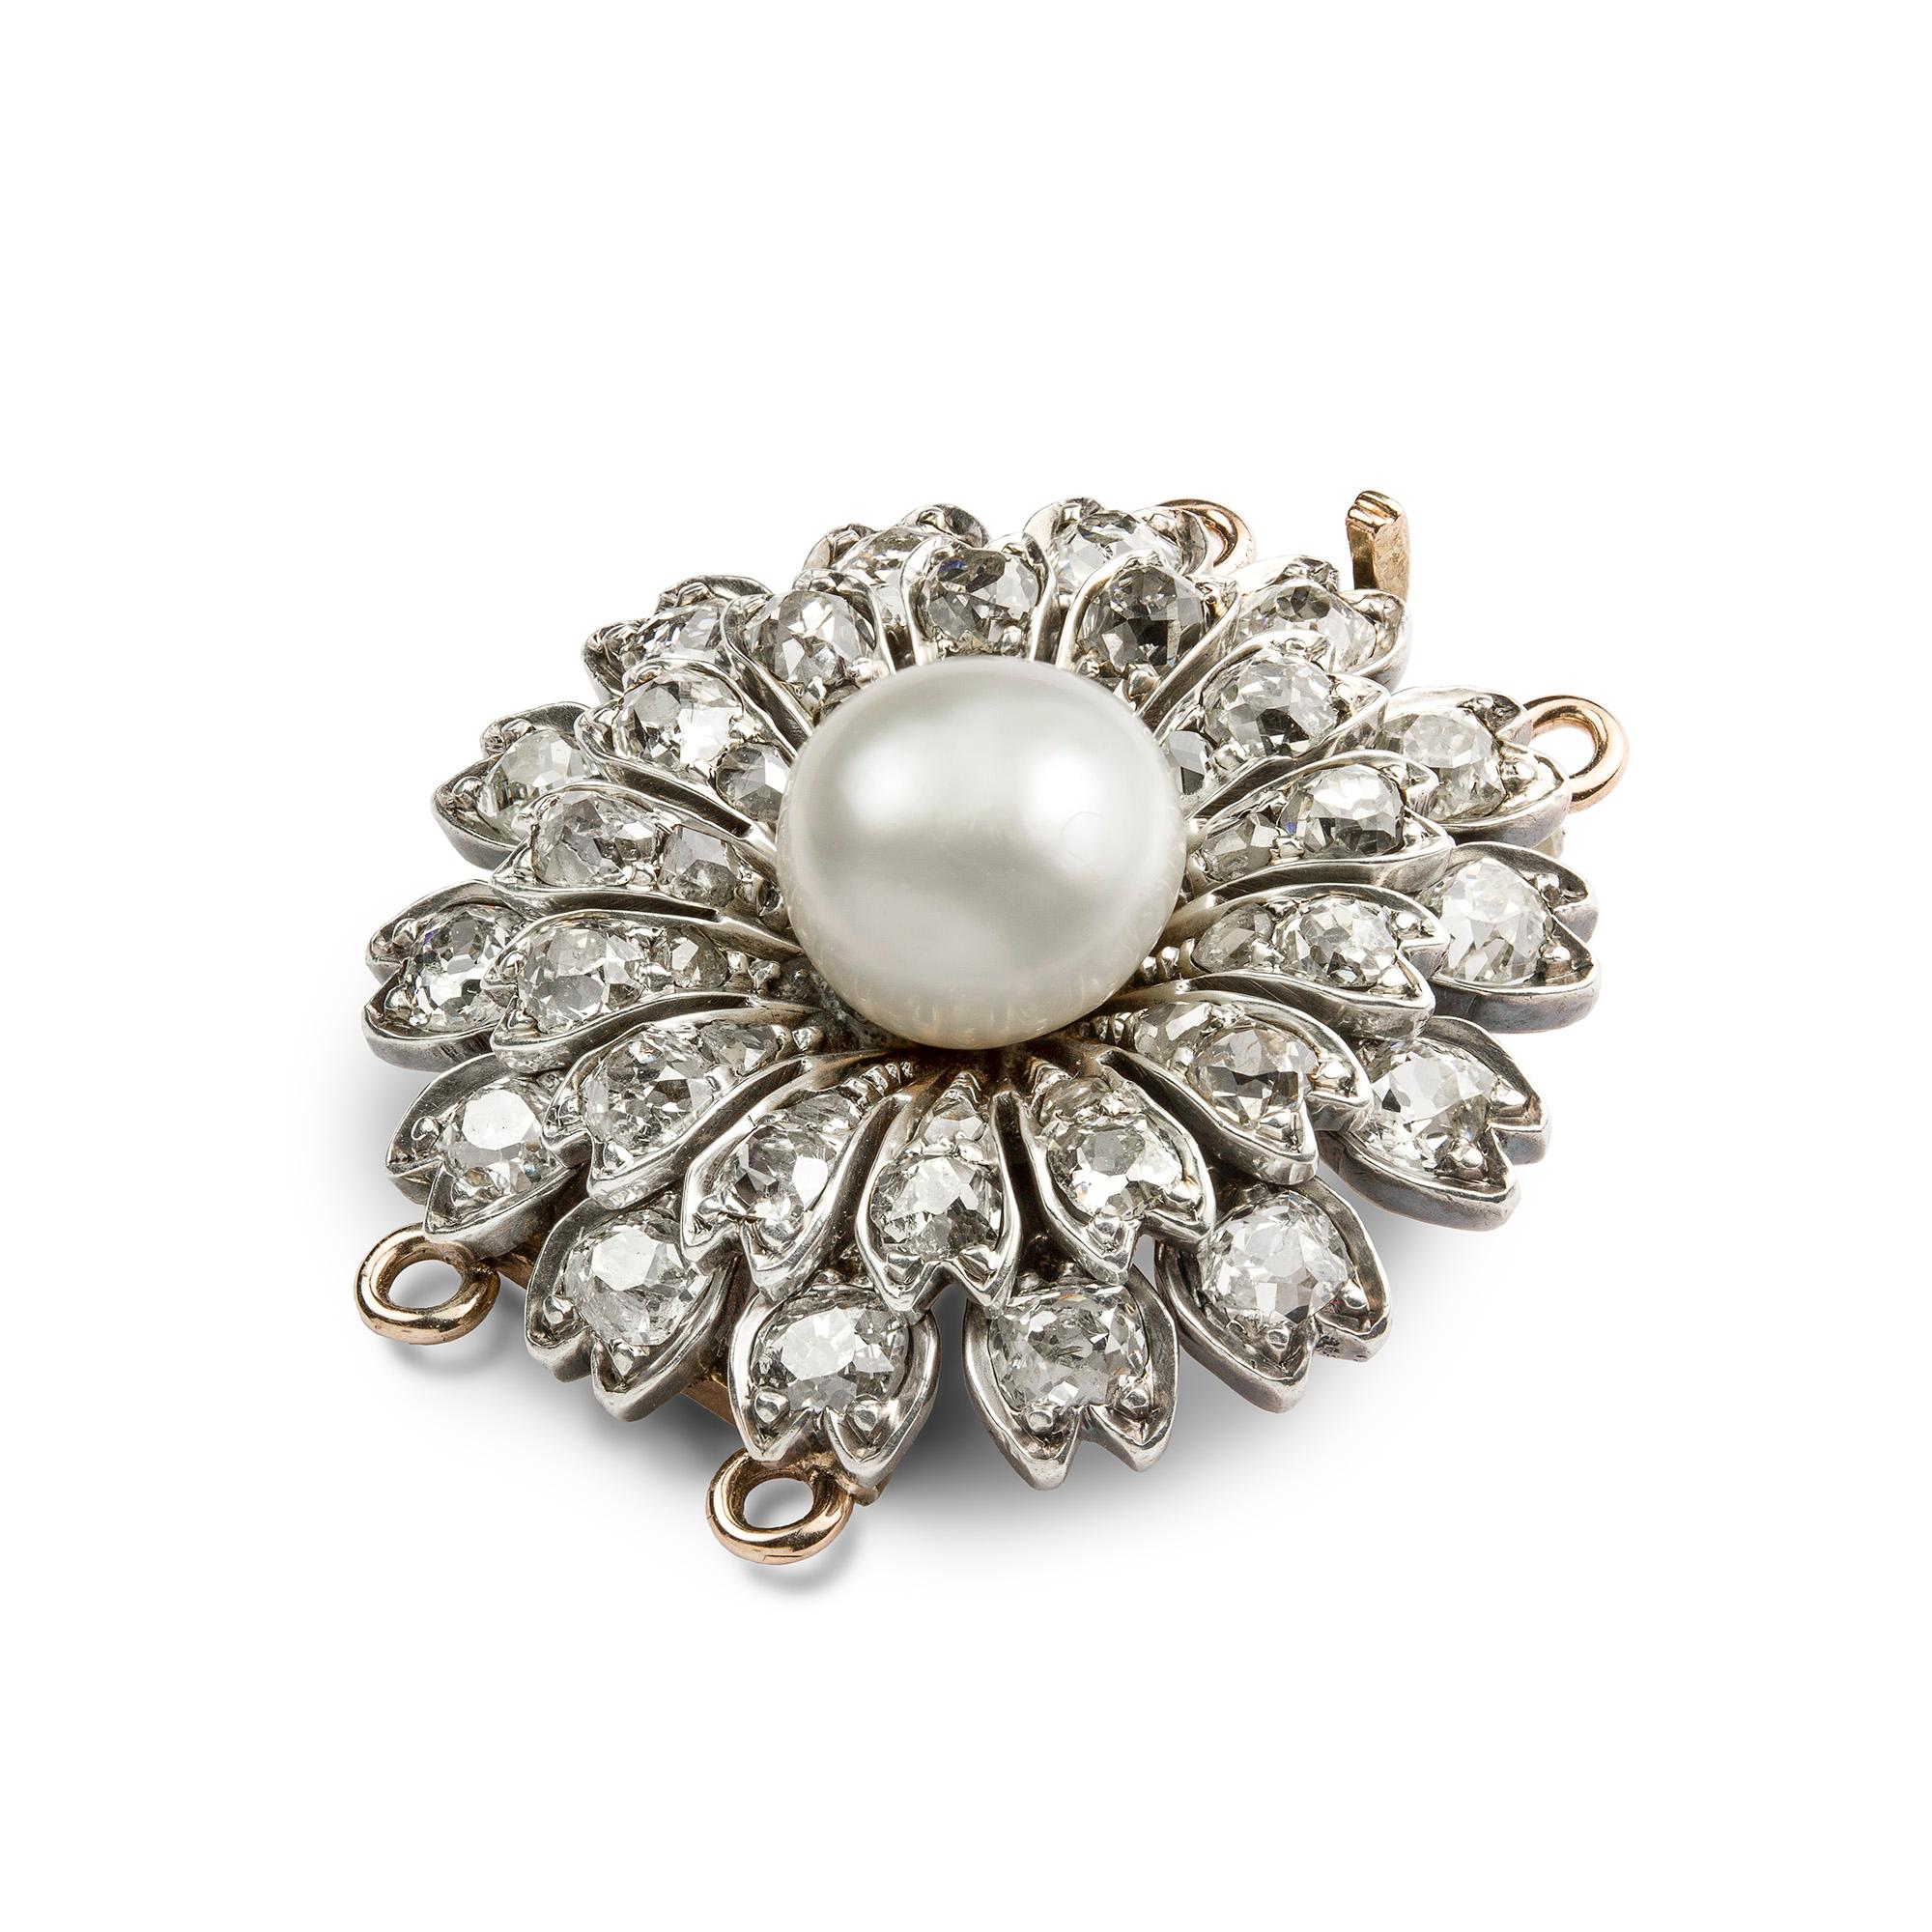 A Victorian diamond flower head cluster clasp with a white bouton pearl centre, accompanied by GCS Report stating to natural of saltwater origin, the two rows of petals with old- and rose-cut diamonds, estimated to weigh a total of 1.9cts, silver